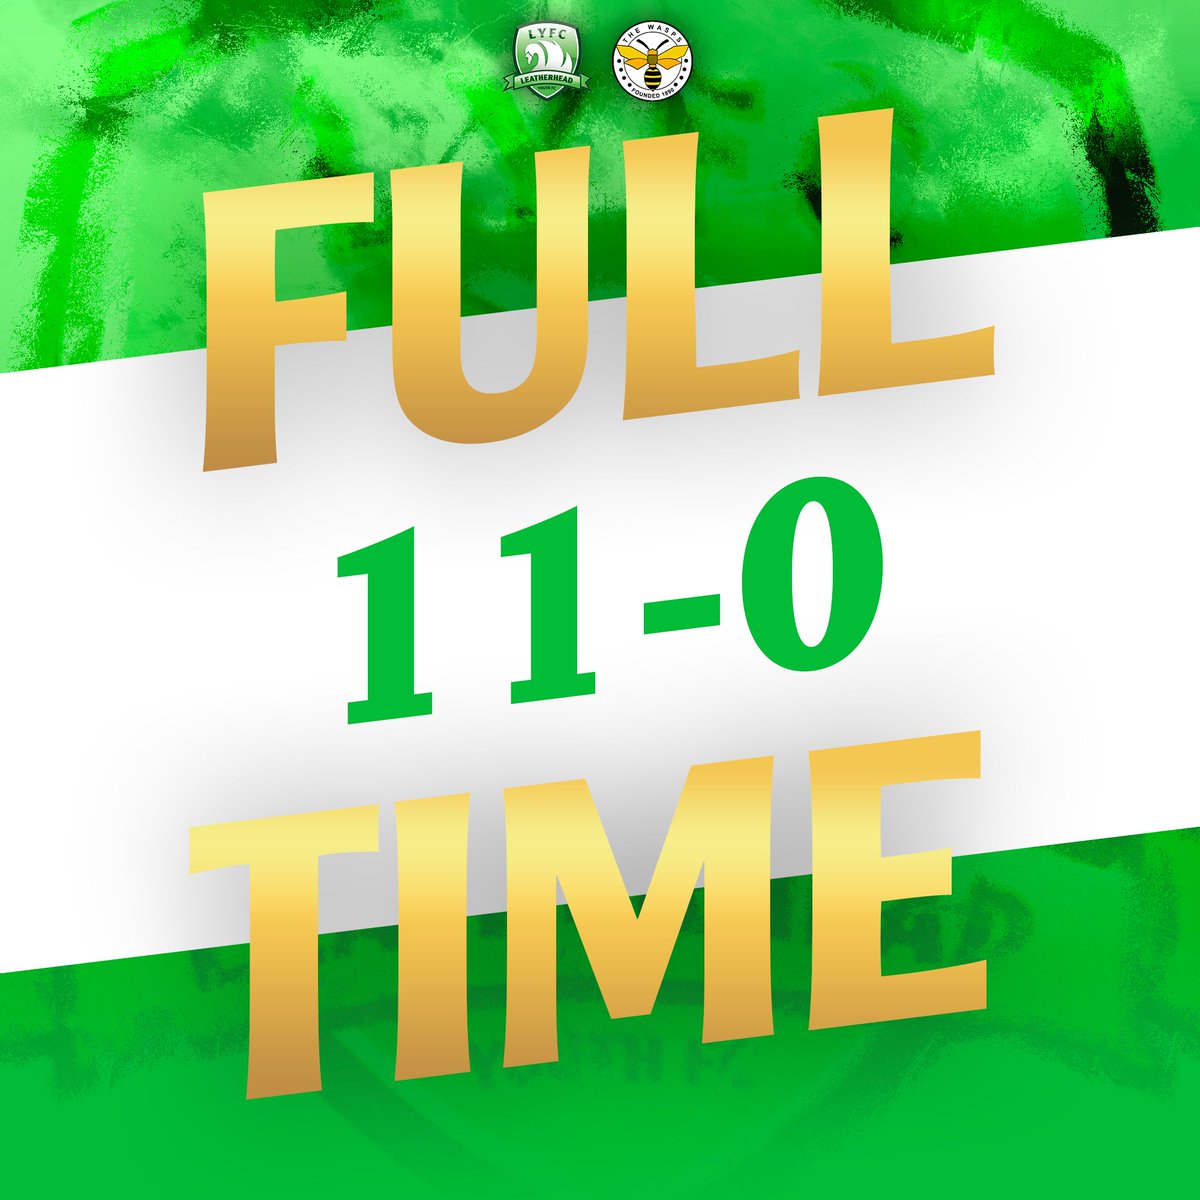 And it's over down at the River Lane Stadium Goals from Ollie, Leo X2, Ryley X2, Noah and Zach X5 blow East Grinstead away with Leatherhead winning 11-0!